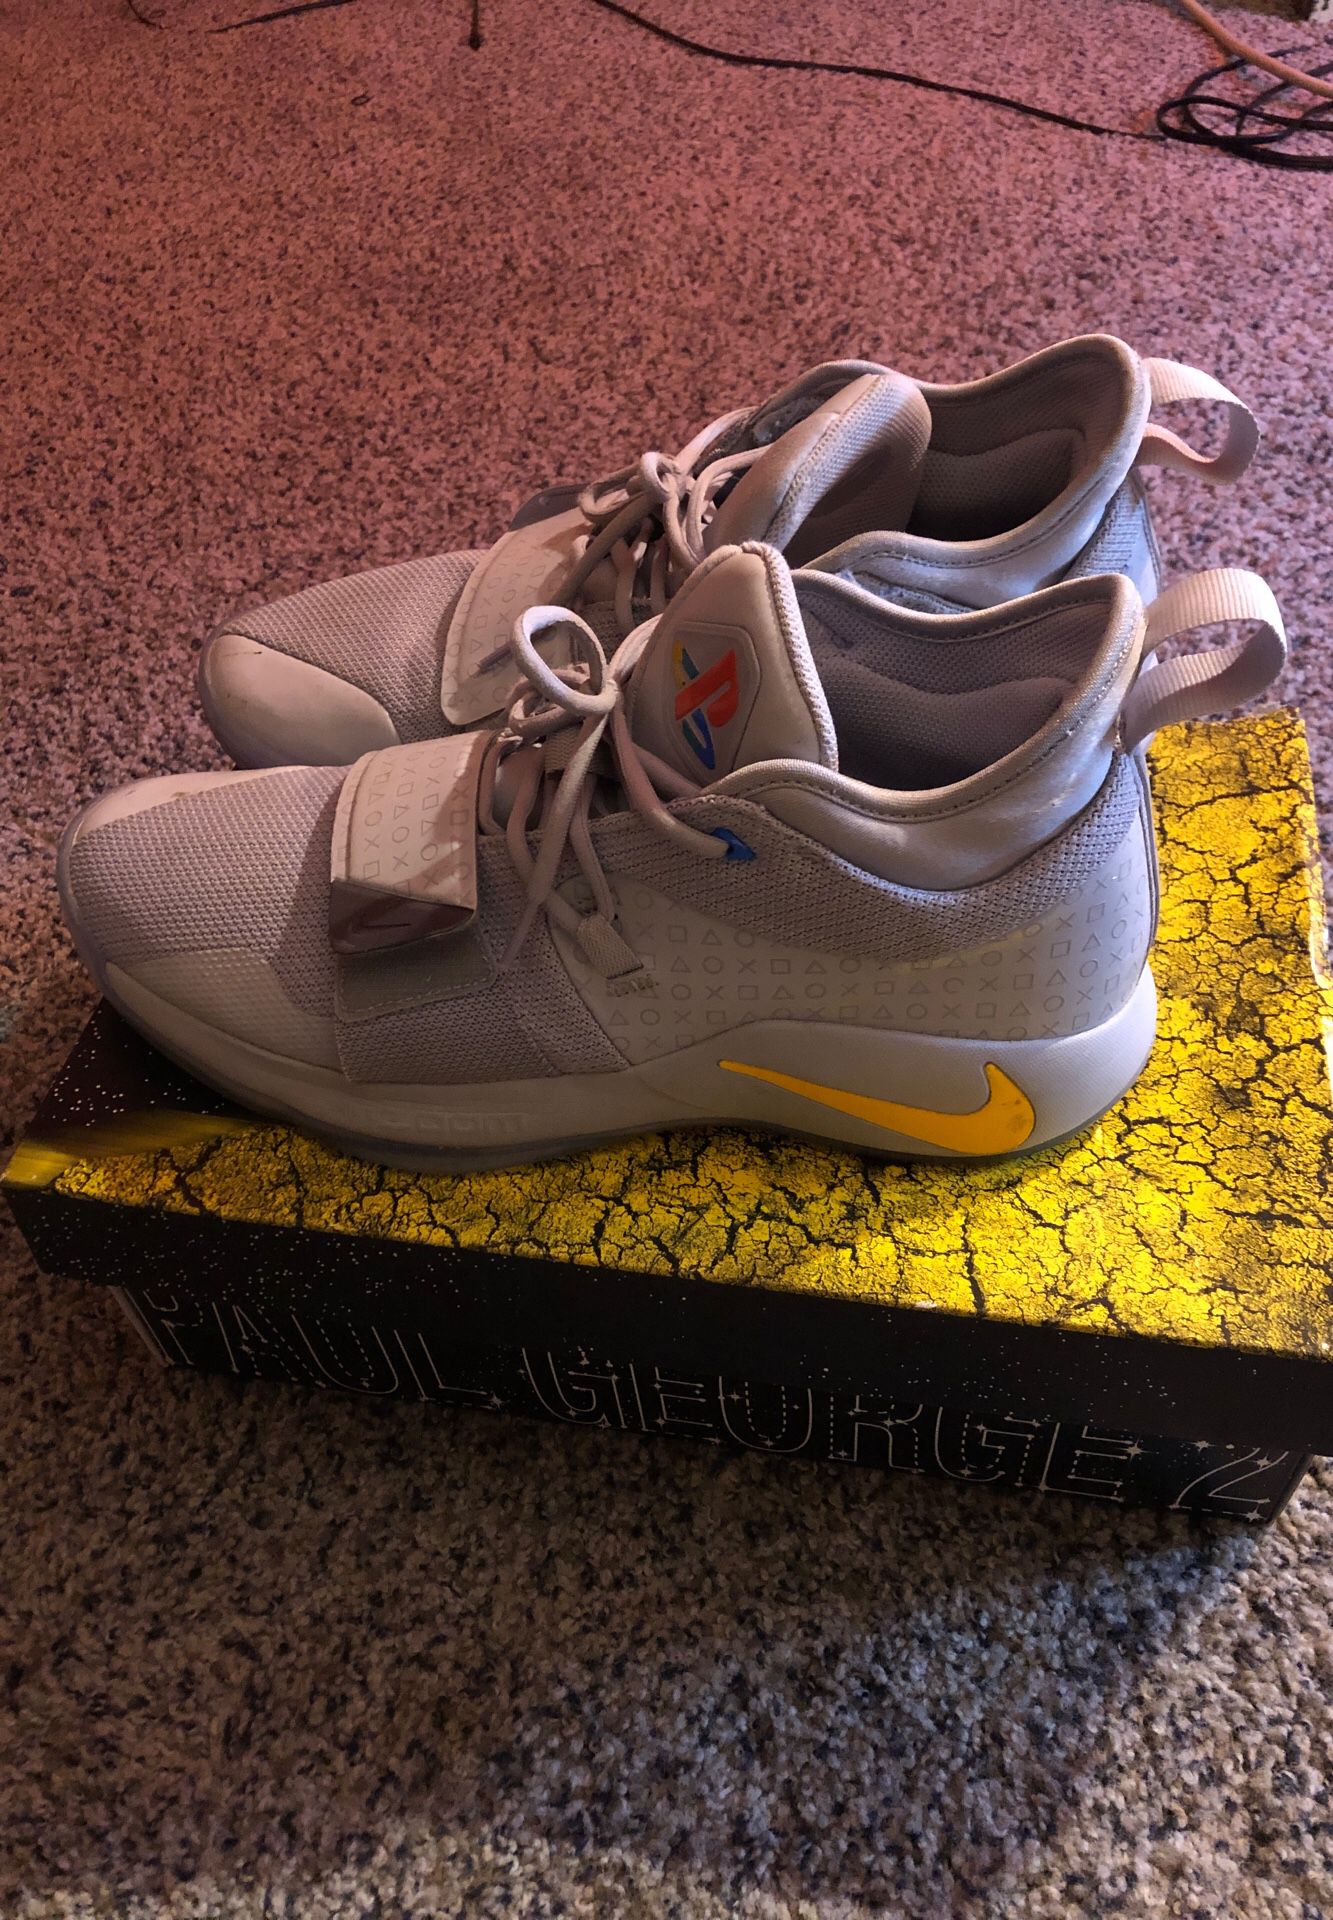 Paul george 2.5 shoes ps4 edition